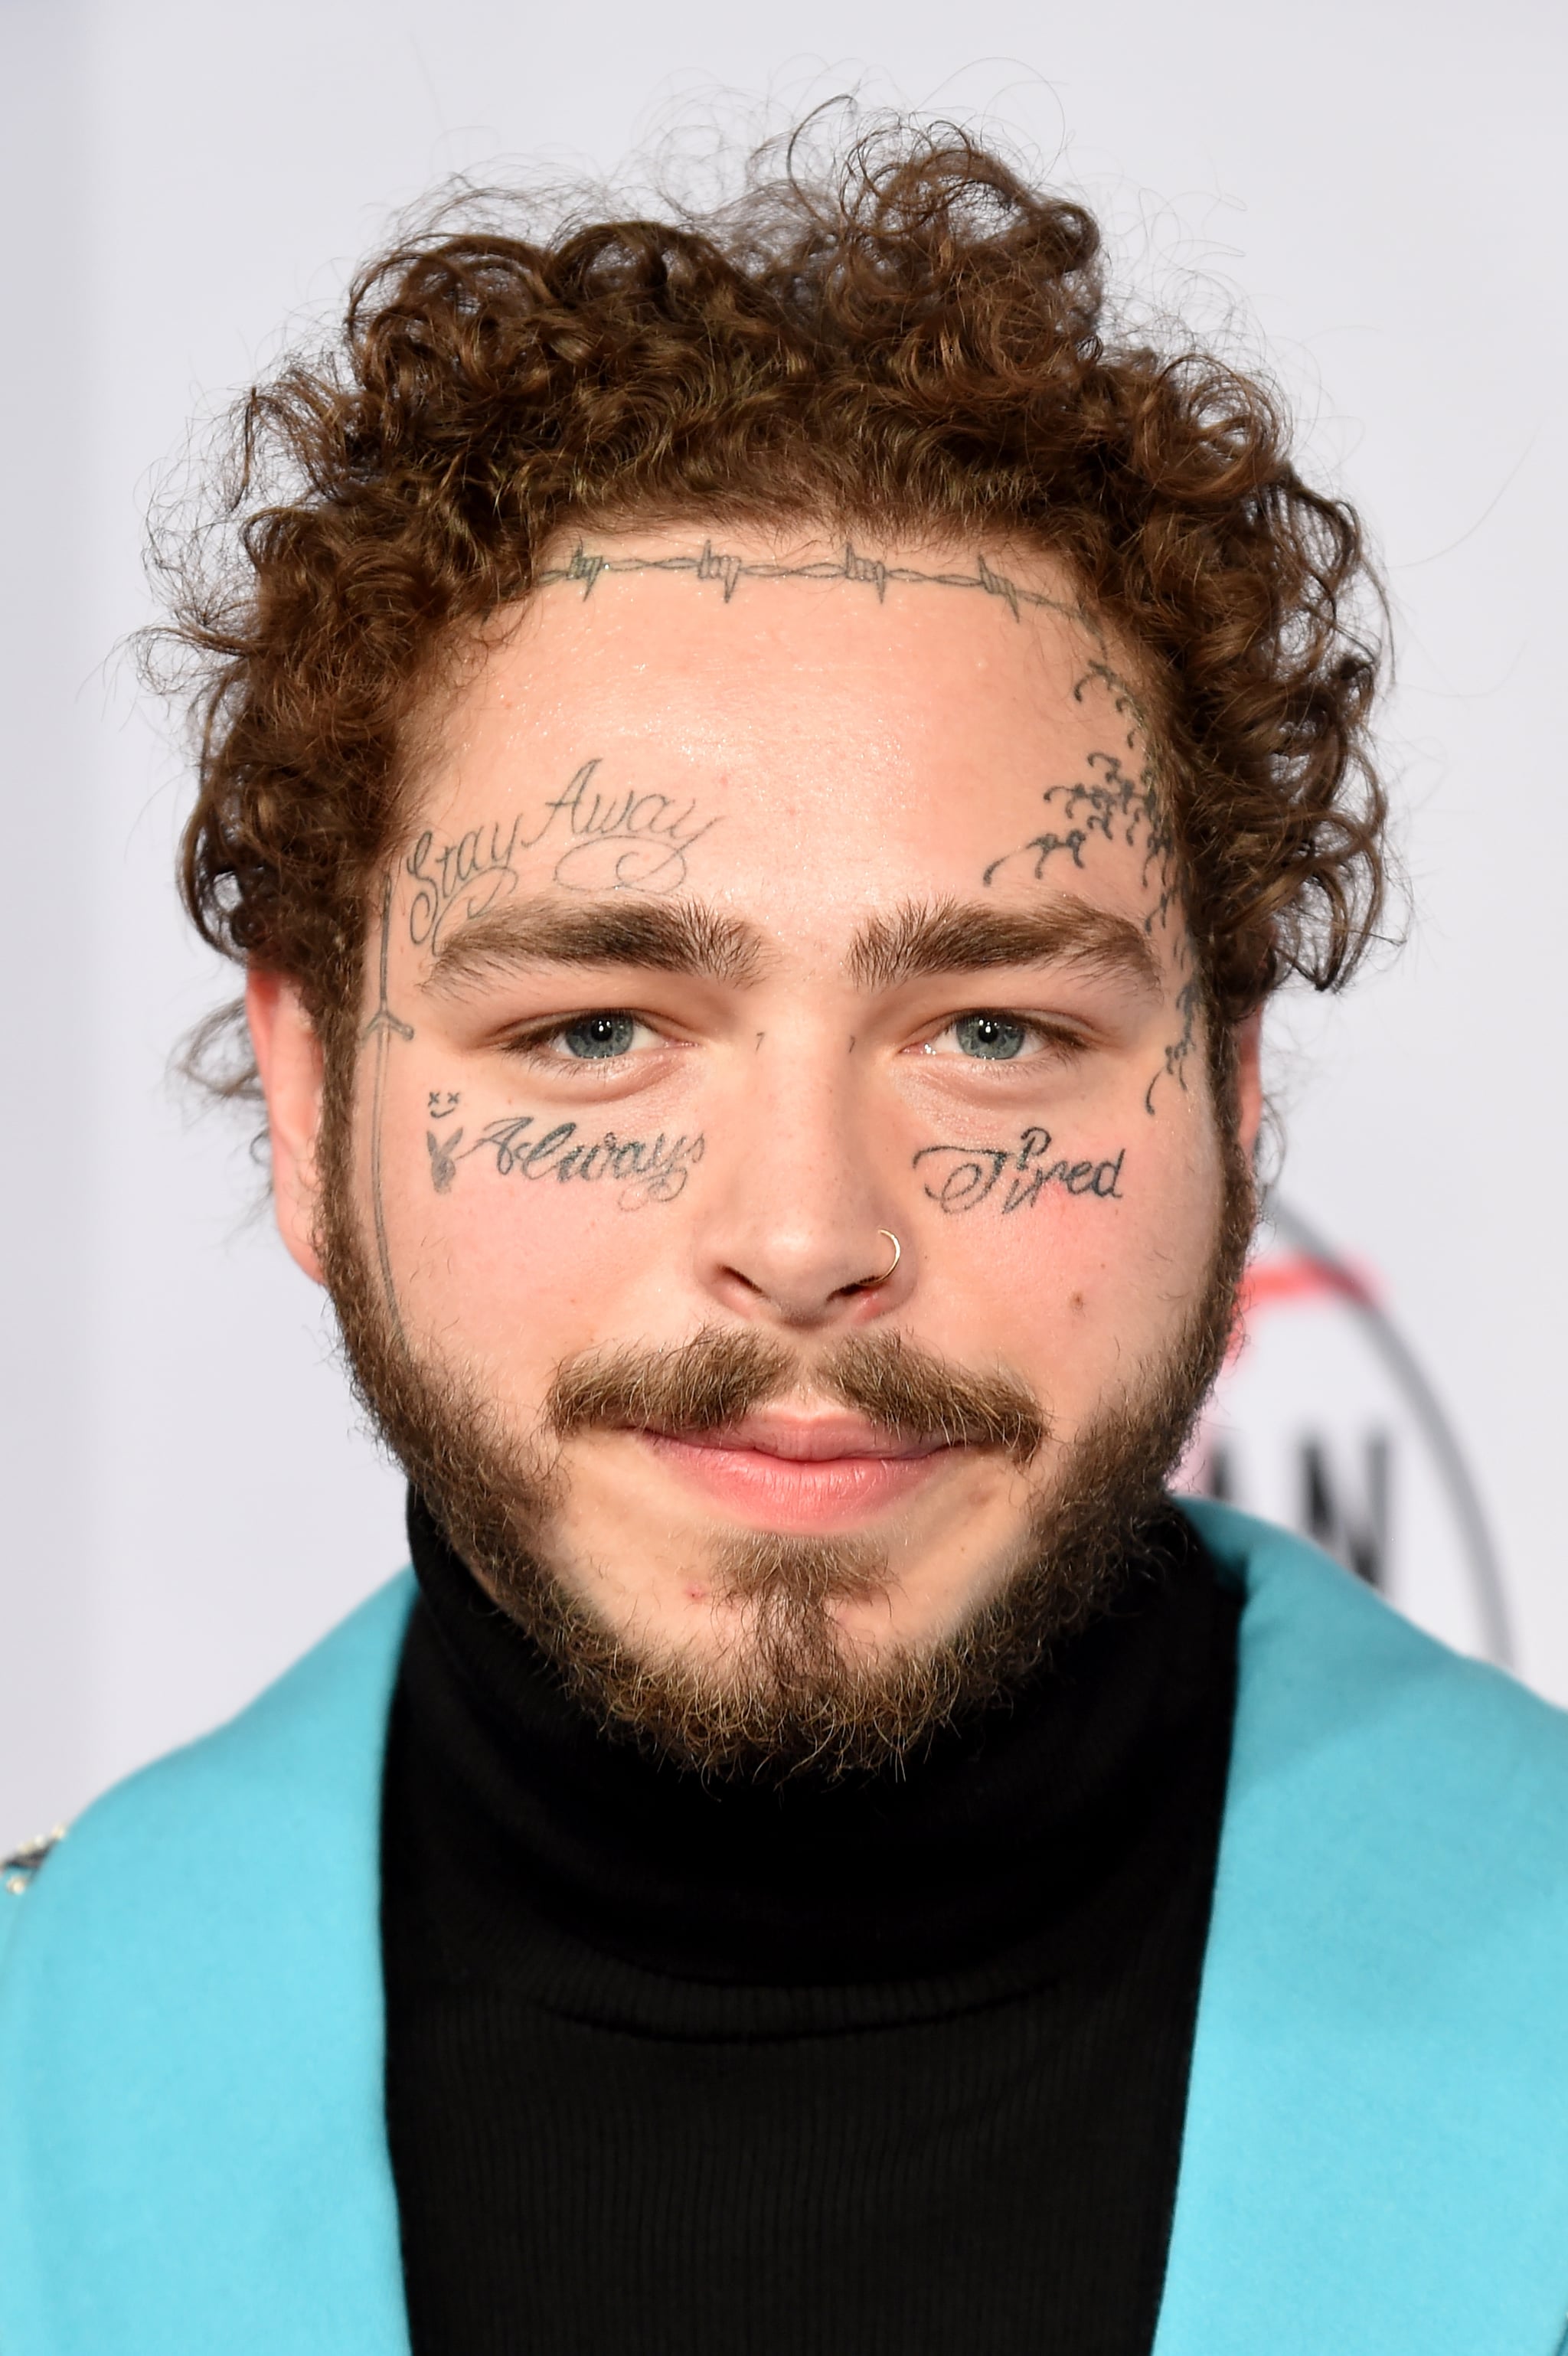 Miniature Devise Trafik Post Malone's Face Tattoos Come From Insecurities | POPSUGAR Beauty